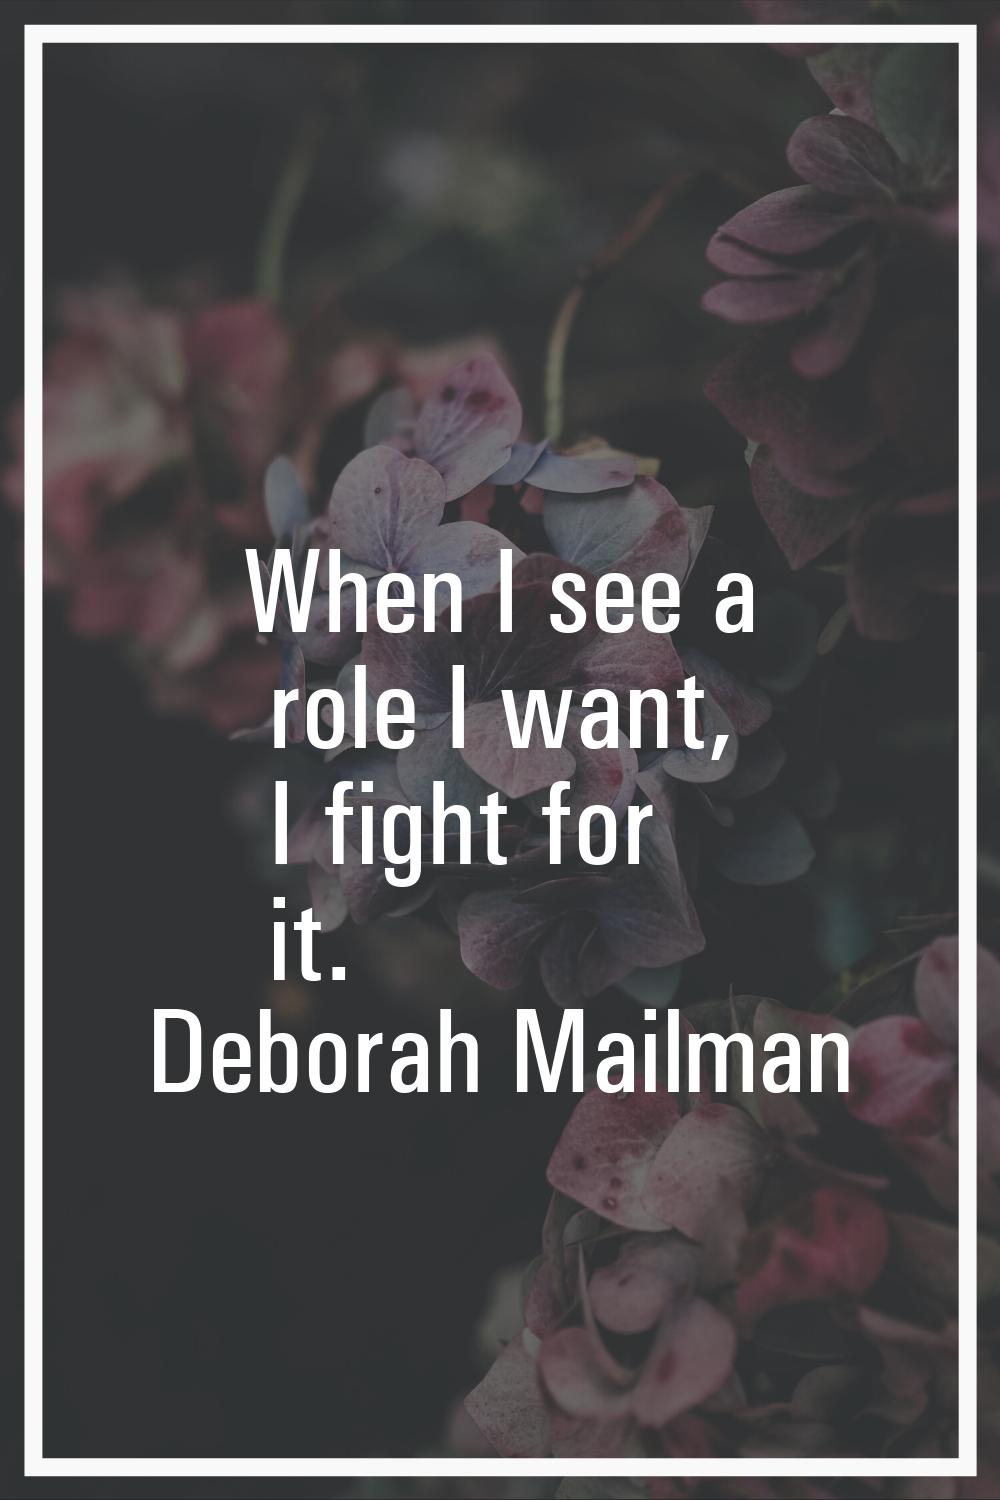 When I see a role I want, I fight for it.